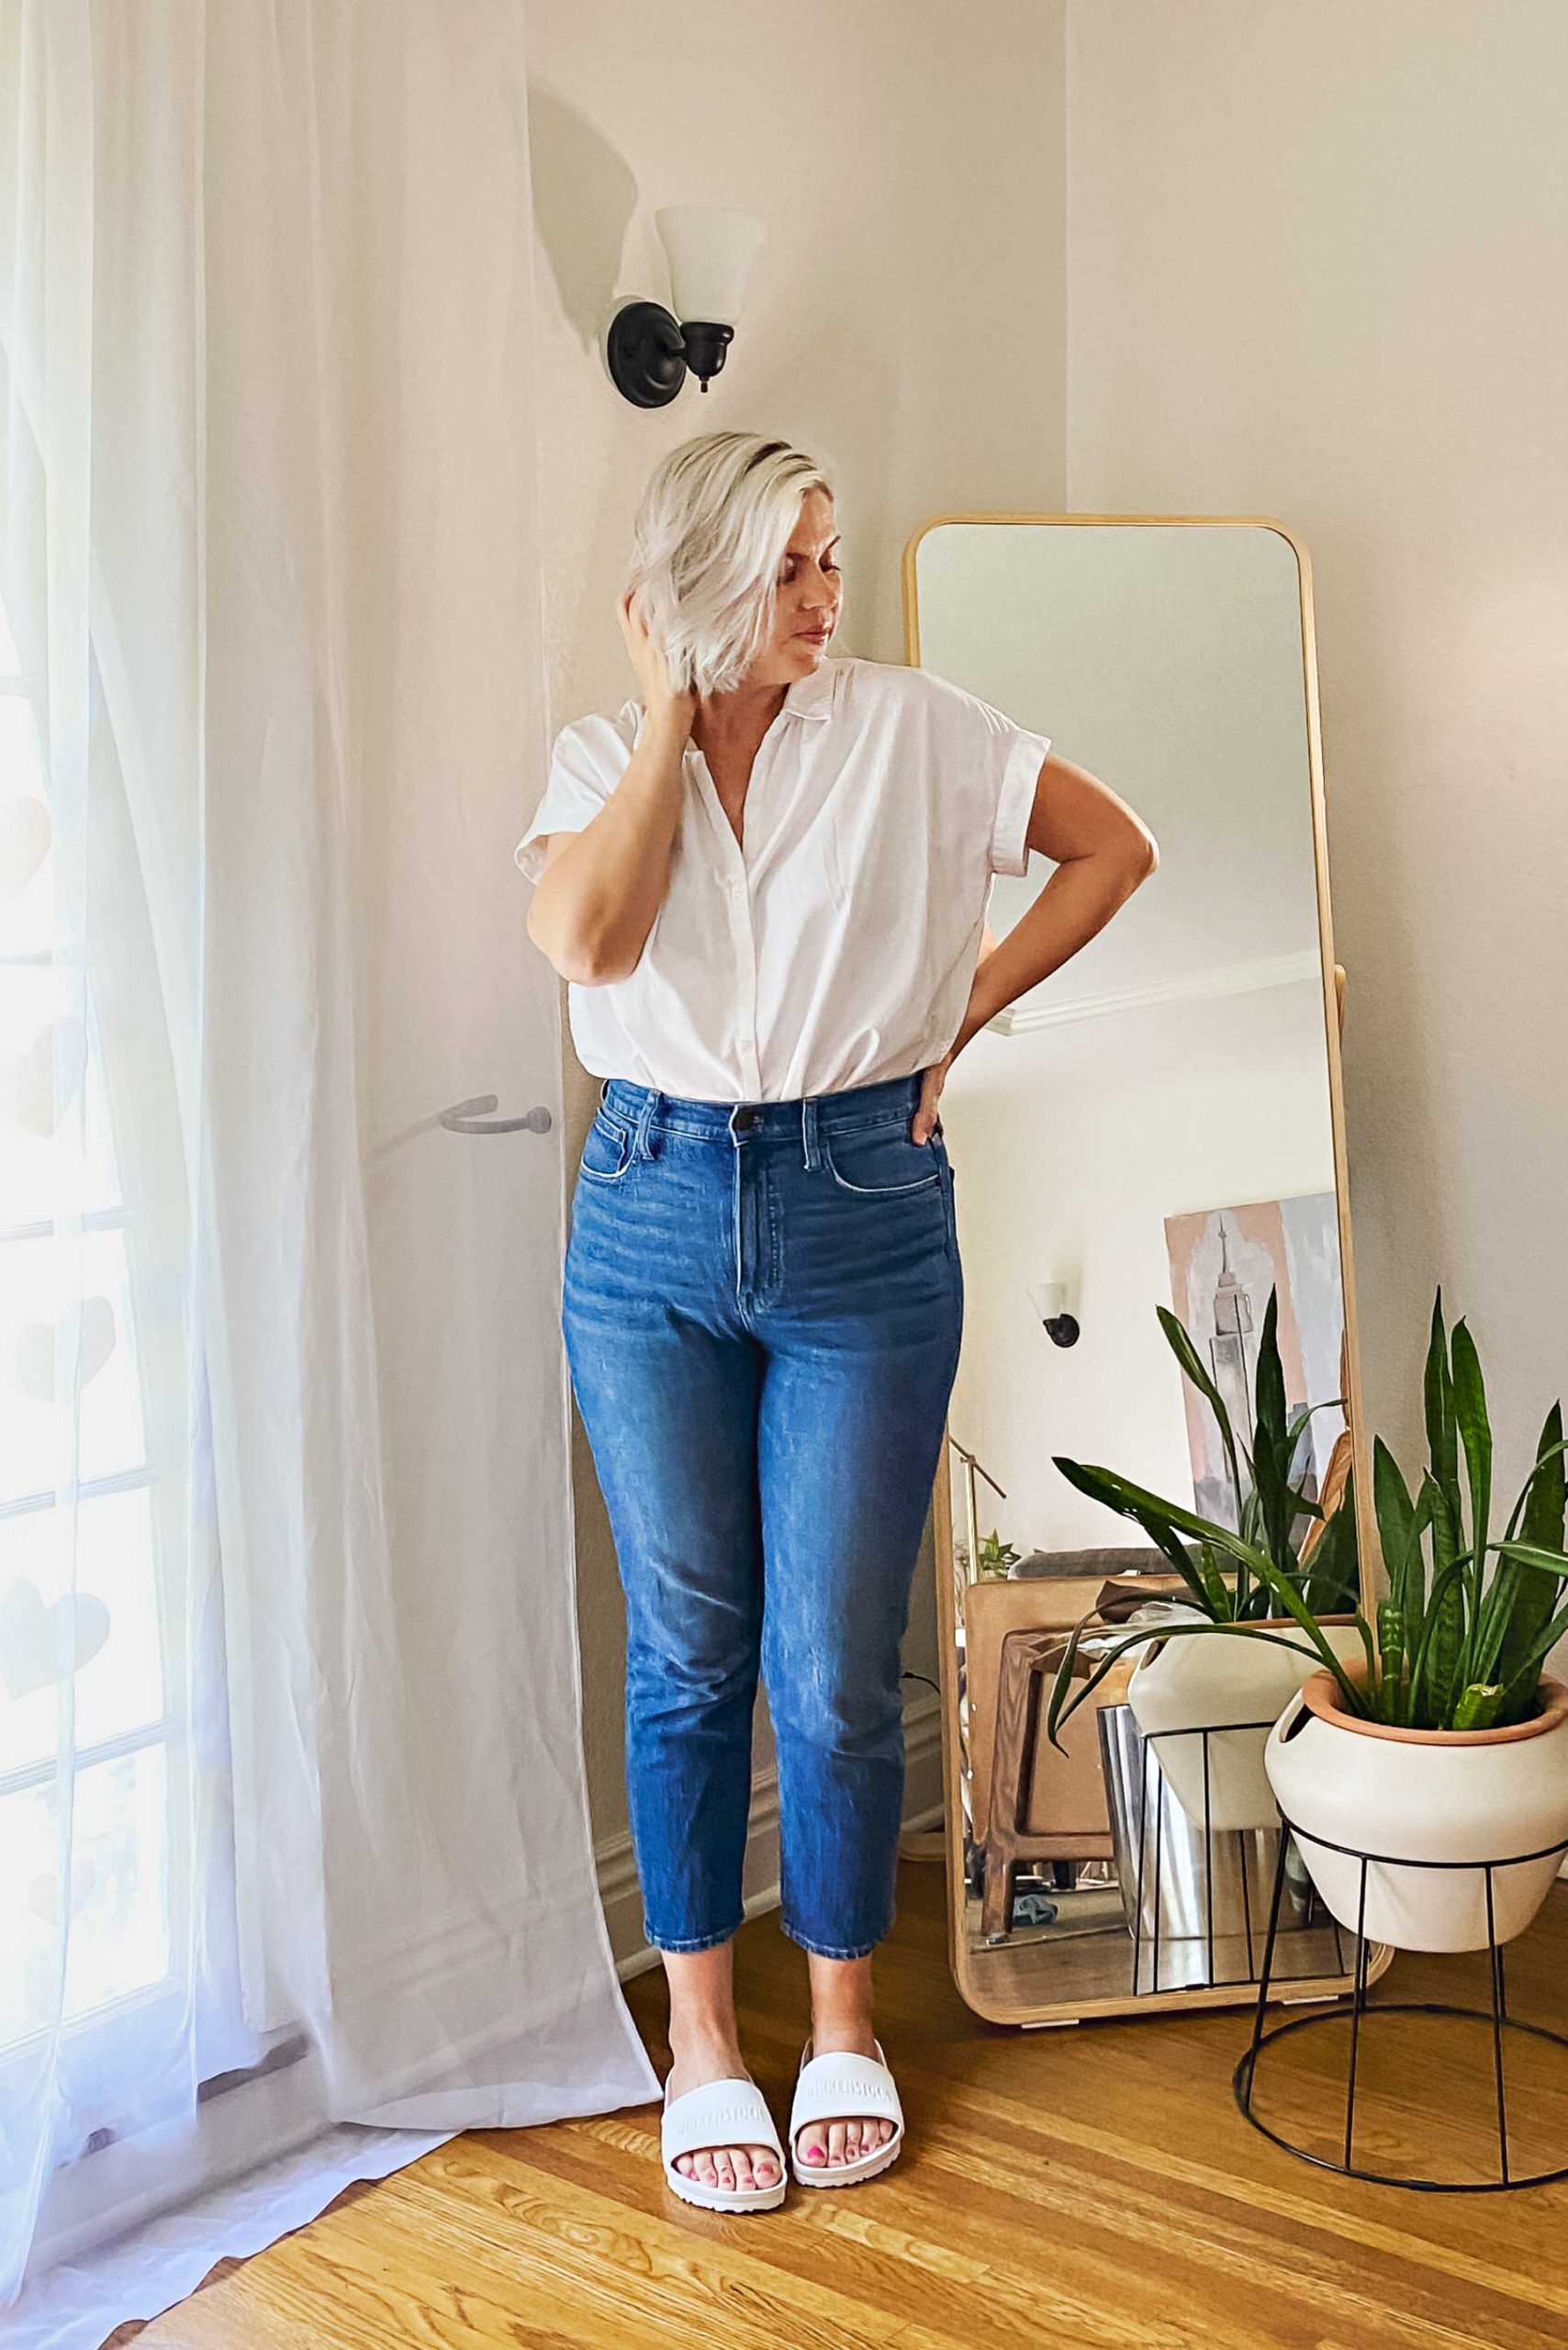 White Button Up and Jeans - THIS MOM'S GONNA SNAP!